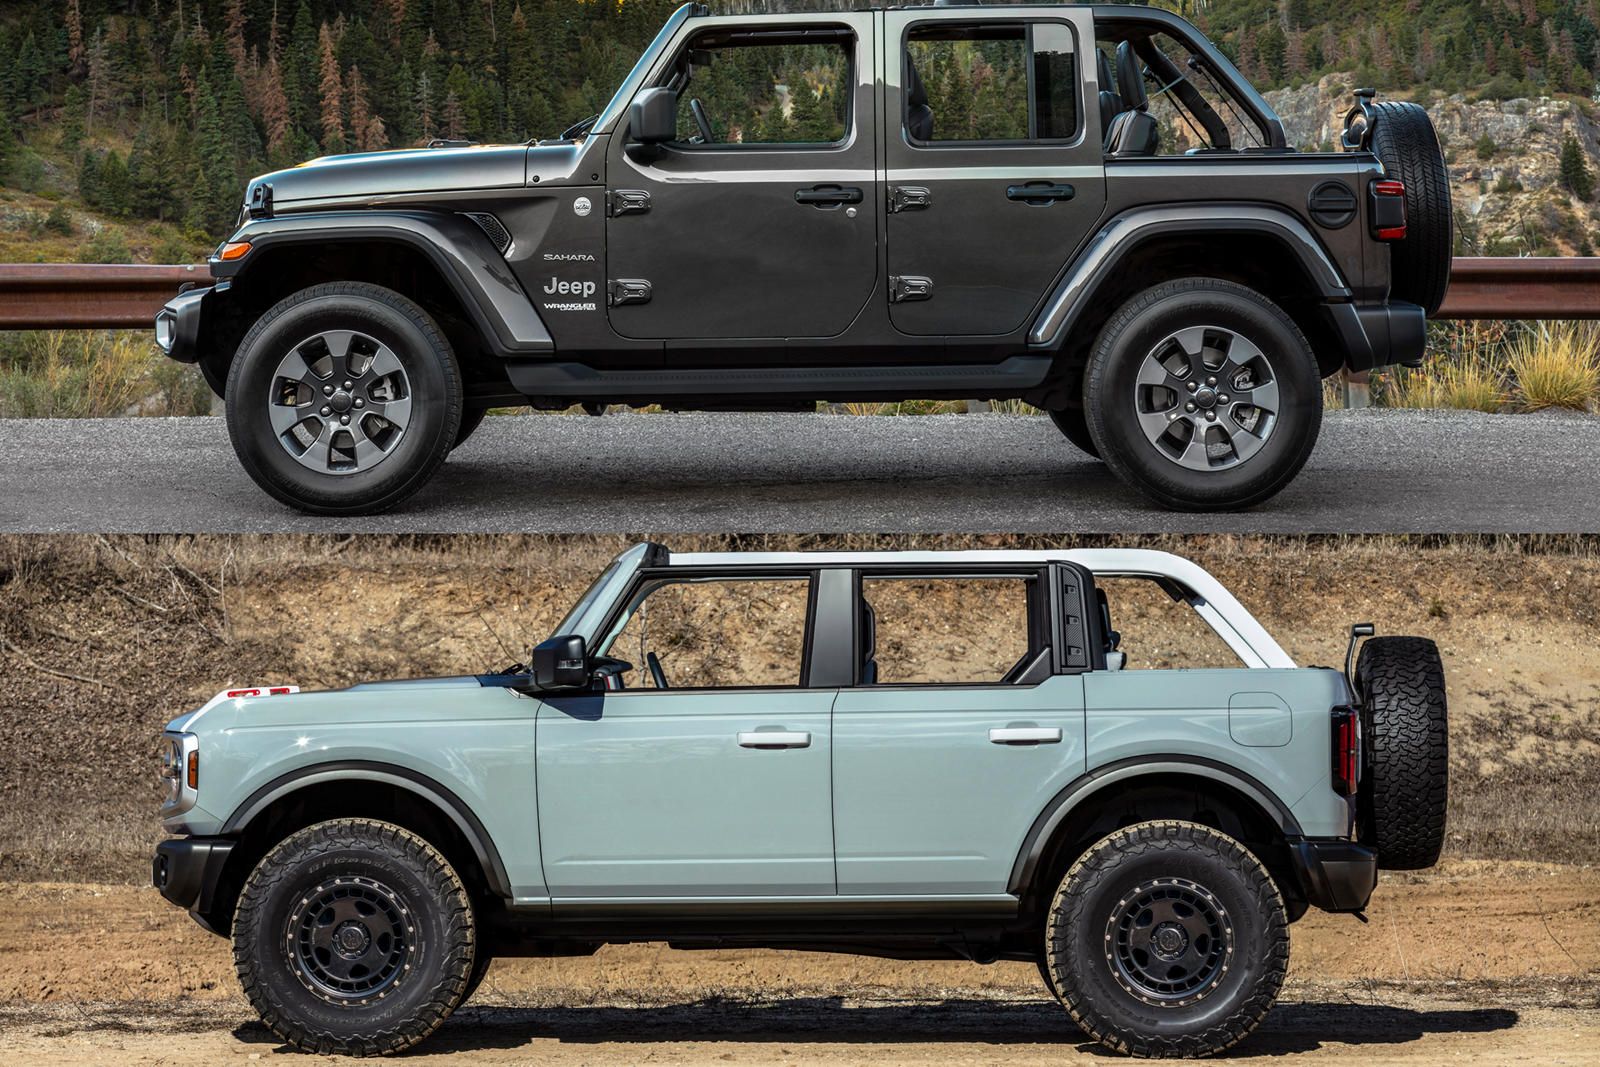 Ford Bronco or Jeep Wrangler? This off-road duel will help you make an informed choice for your next adventure on rugged terrains